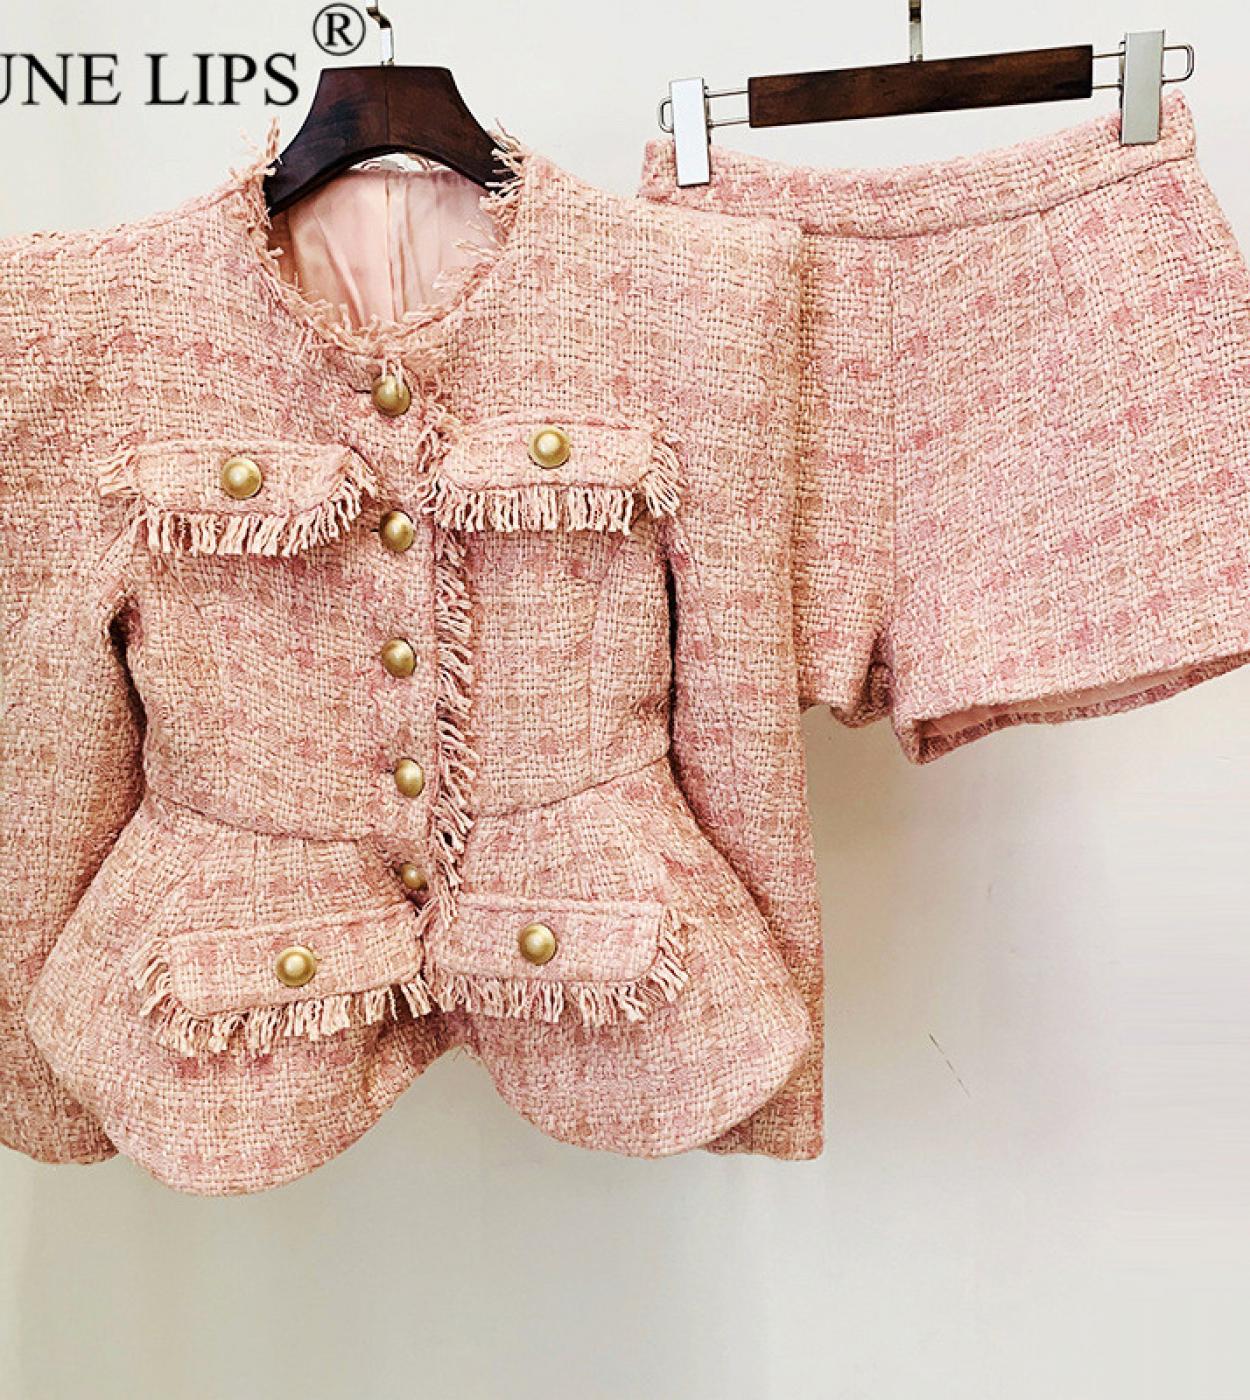 June Lips Shorts Set Womens Bright Silk Single Breasted Slim Fit Pink Tweed Coat  Shorts Twopiece Set Autumn And Winte